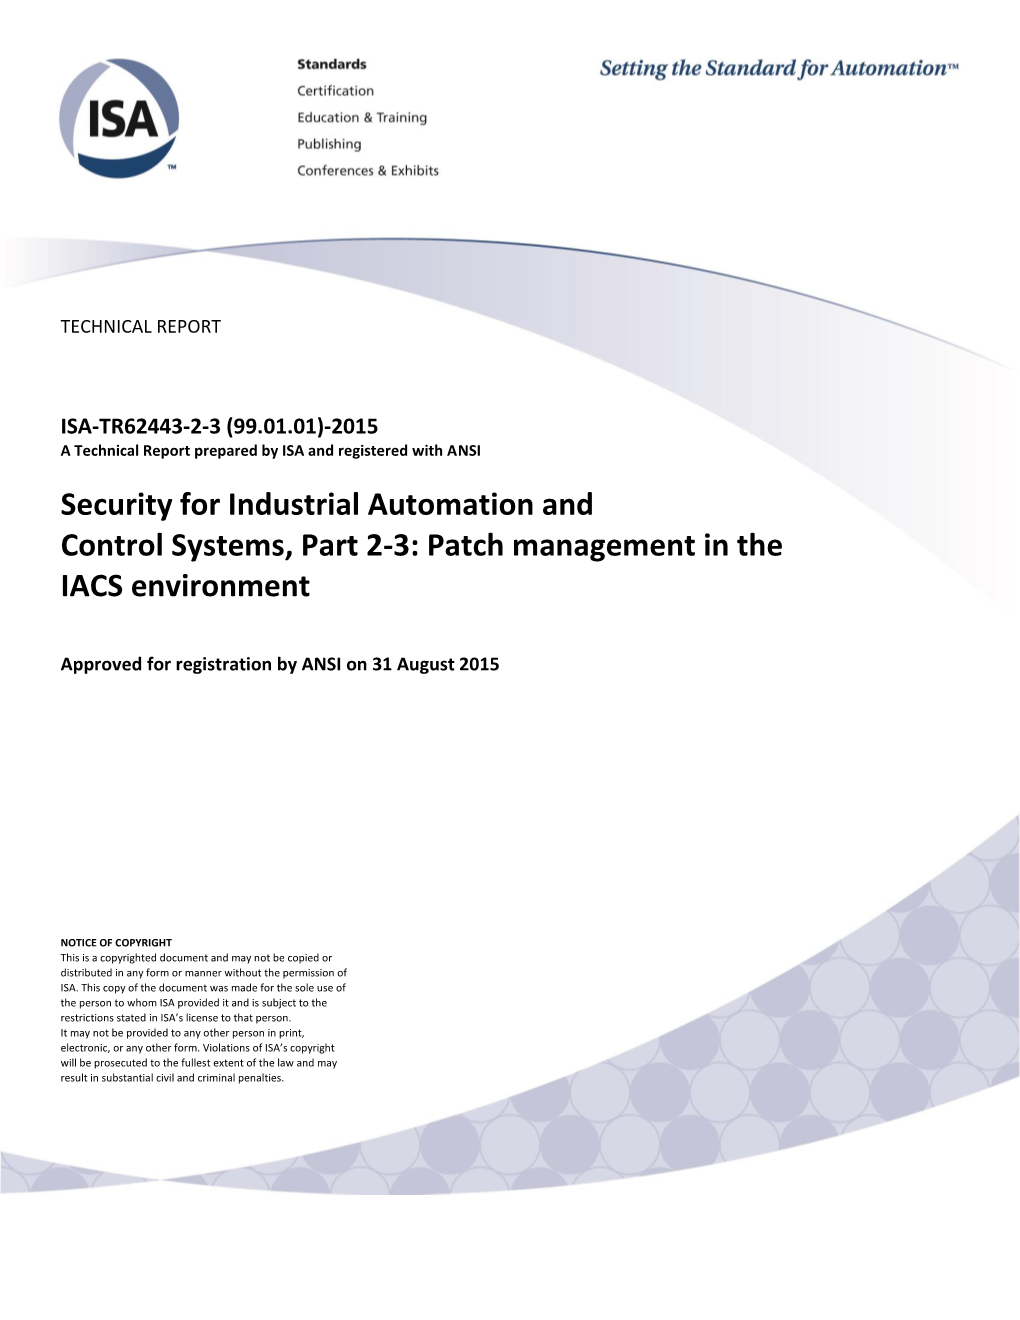 Security for Industrial Automation and Control Systems, Part 2-3: Patch Management in the IACS Environment